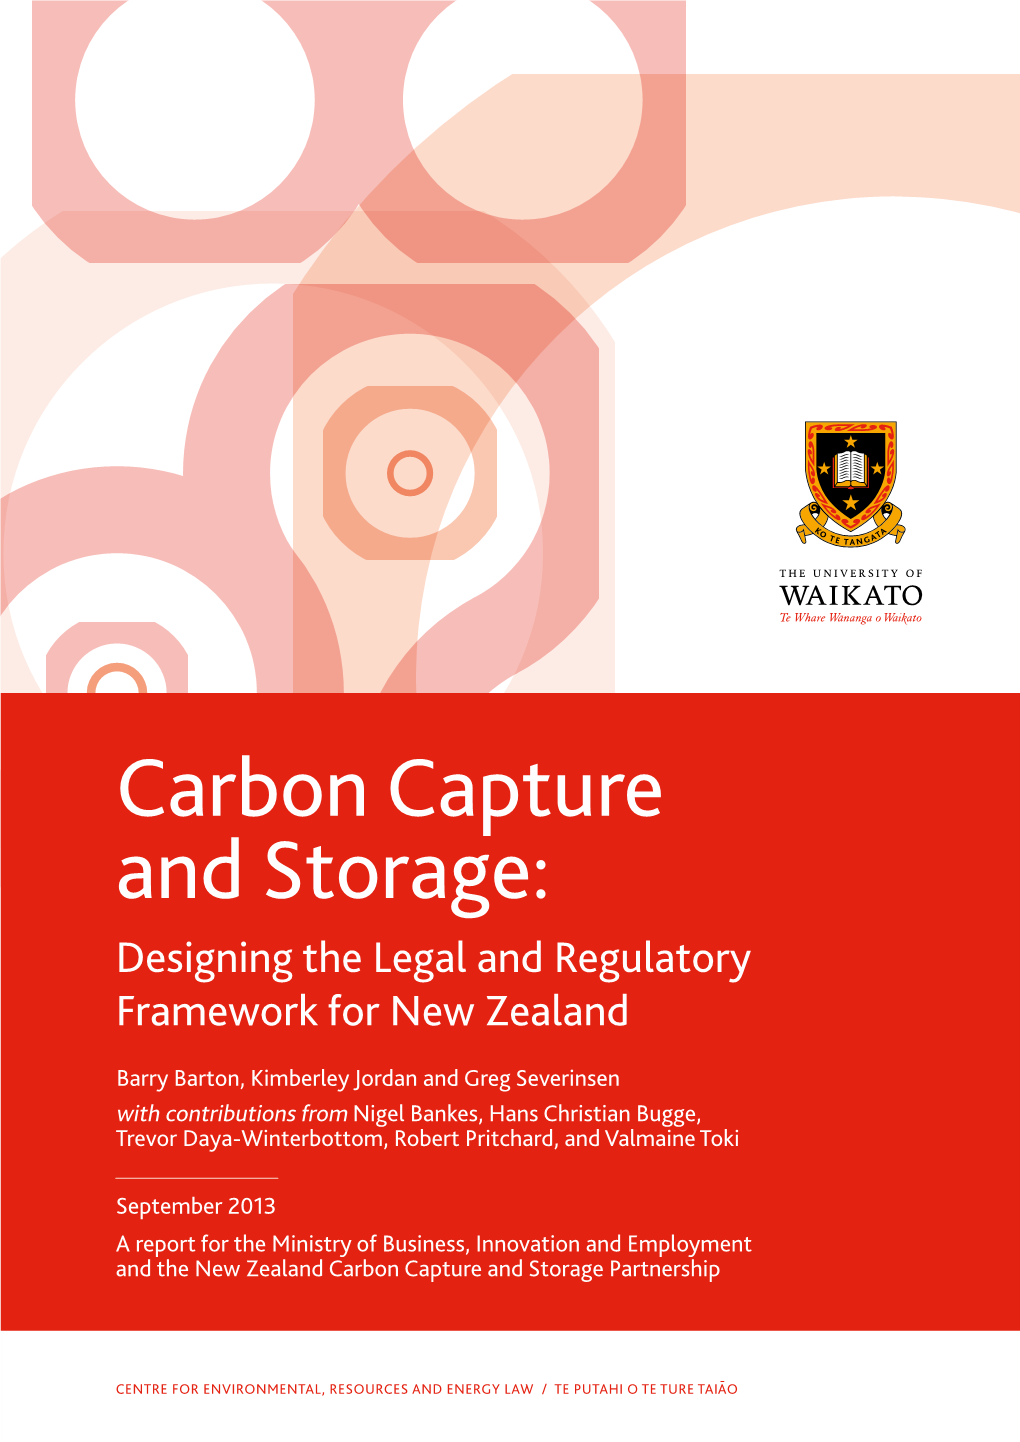 Carbon Capture and Storage: Designing the Legal and Regulatory Framework for New Zealand